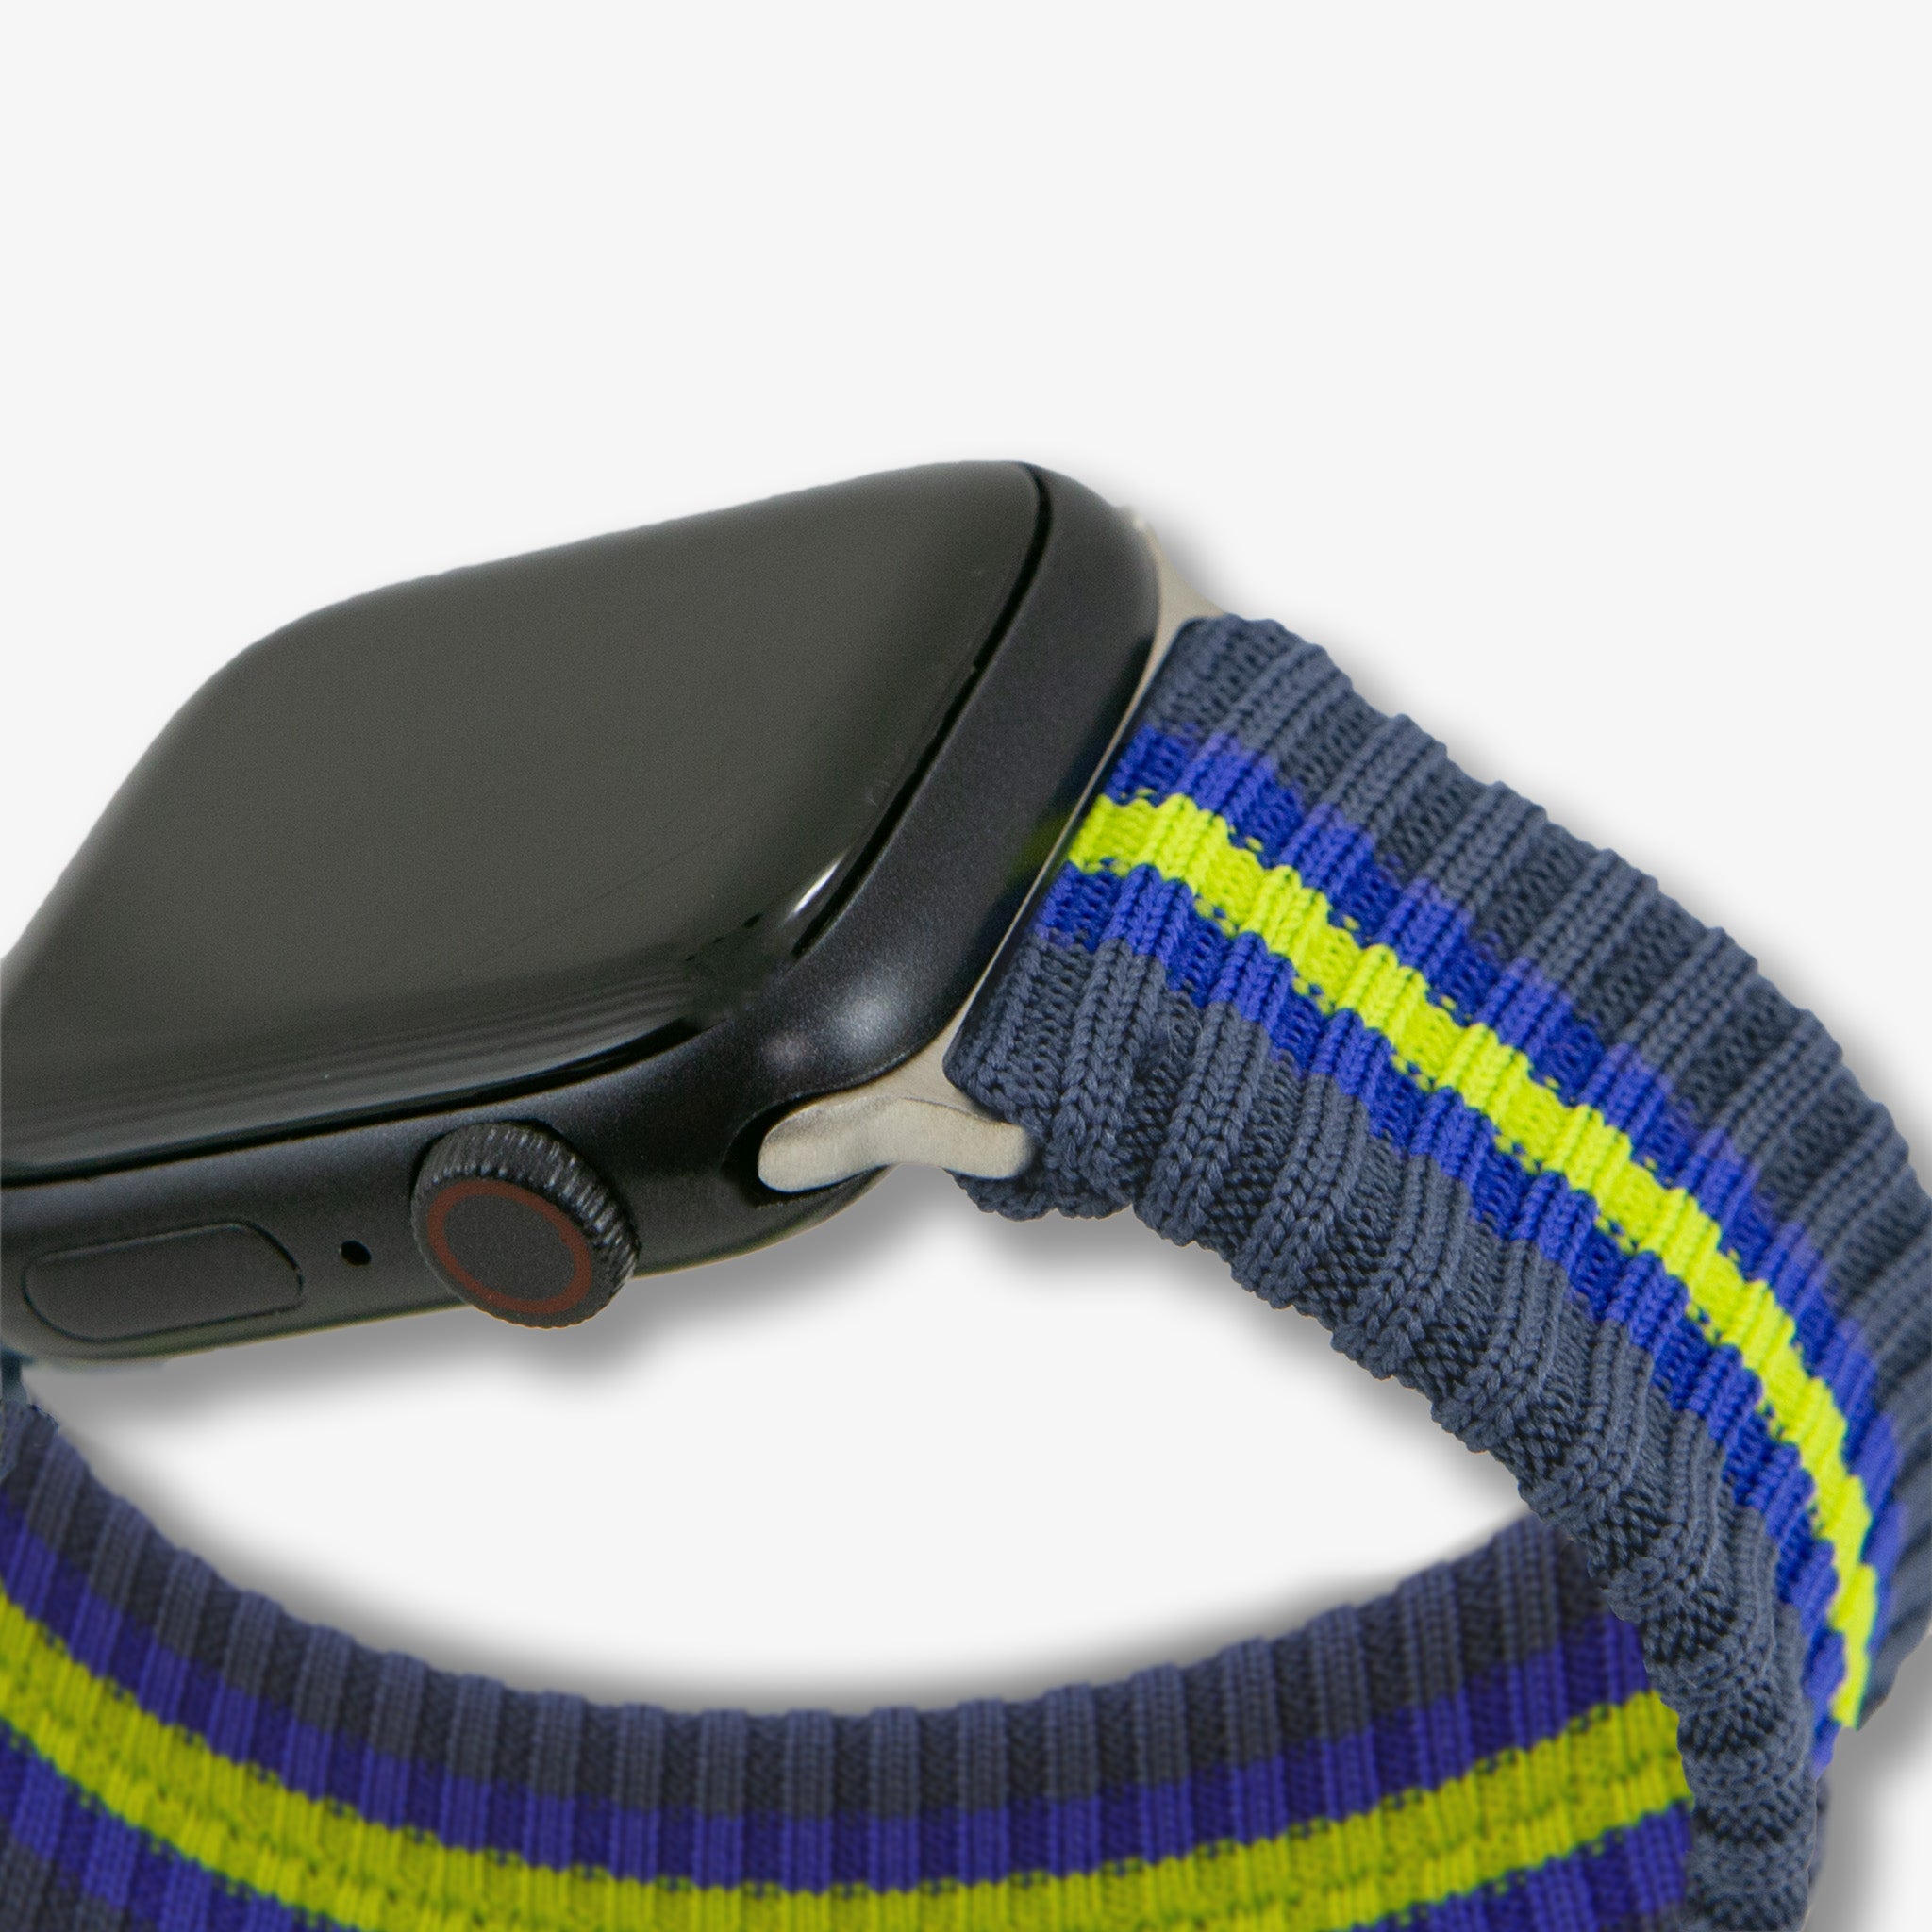 Knit Apple Watch® Band - Navy and Yellow Stripe